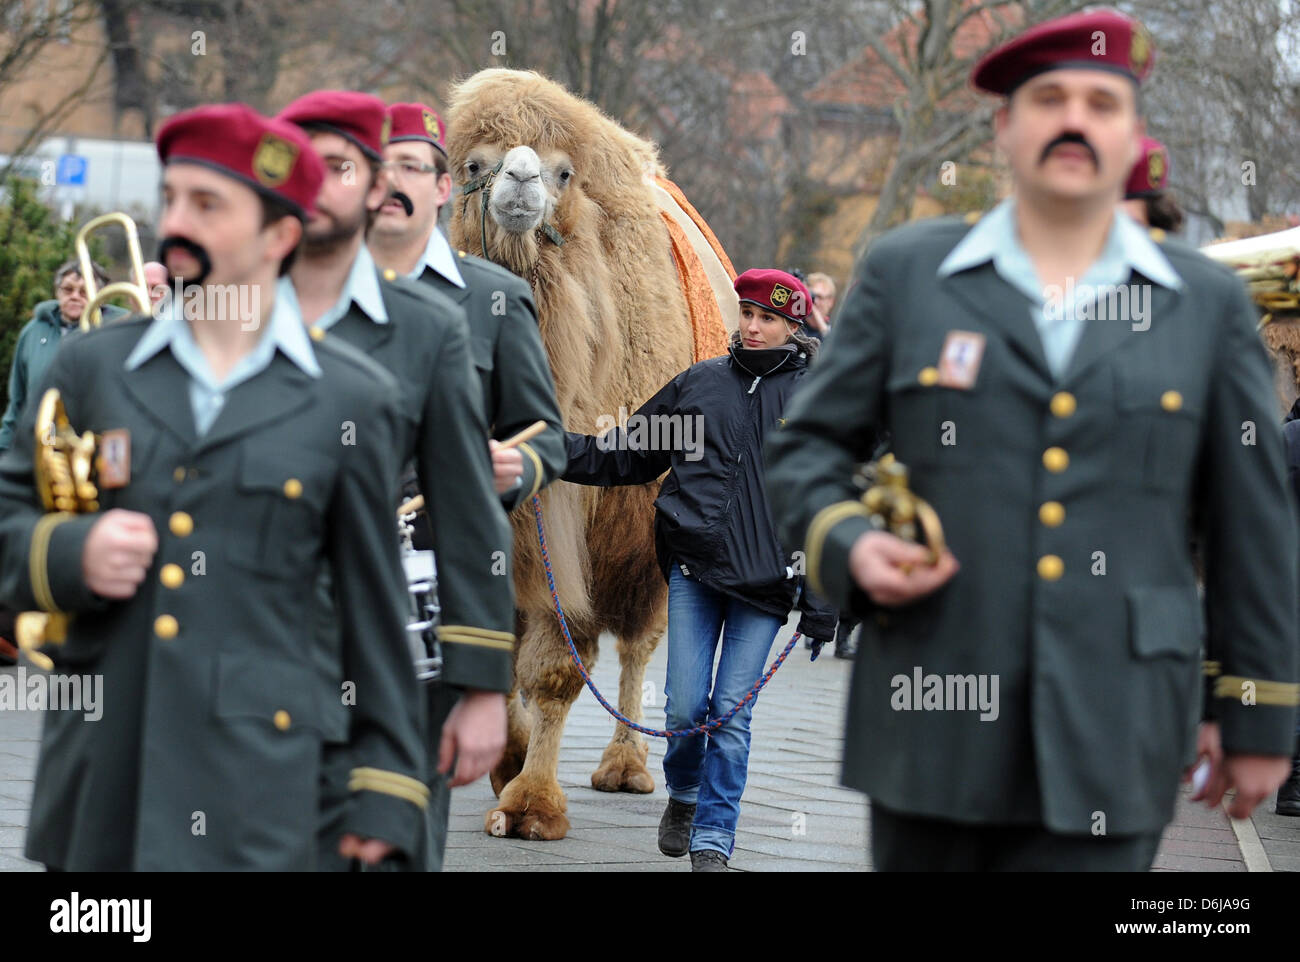 Representatives from the ficticious country Wadiya arrive to the convention center with music and camels at the International Tourism Trade Fair (ITB) in Berlin, Germany, 10 March 2012. A 'delegation' from the ficticious country arrived for an advertising campaign for the film 'The Dictator'. Around 12,000 exhibitors from 187 countries are presenting the travel offers at the ITB in Stock Photo